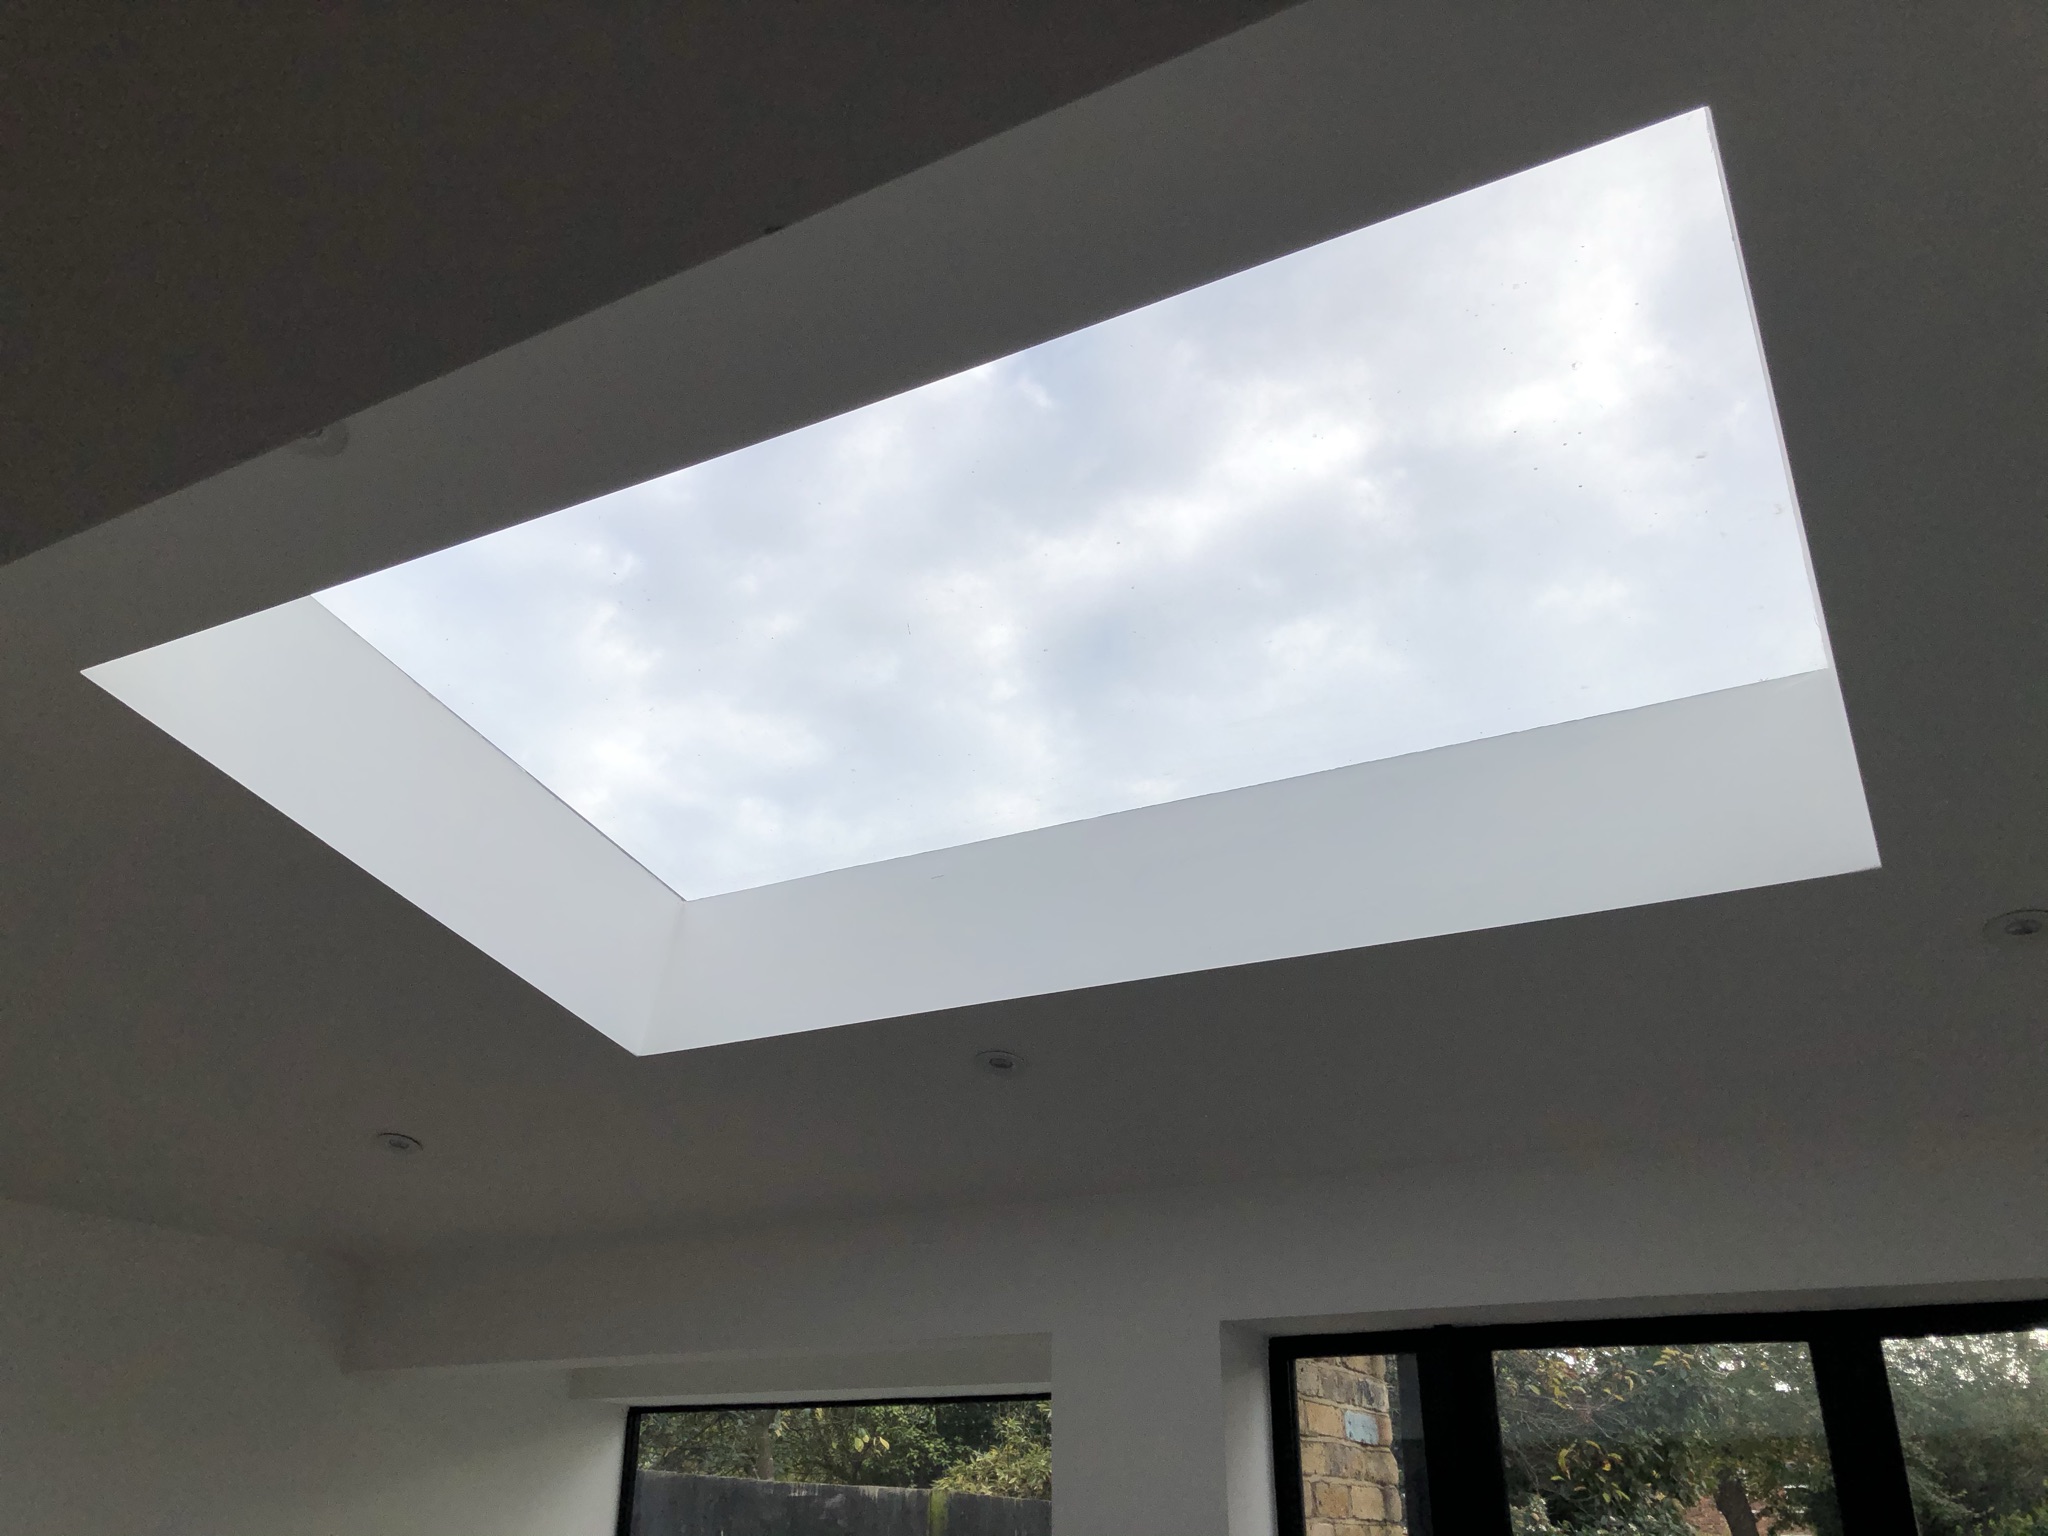 Frame of a rooflight with the external rooflight blind installed